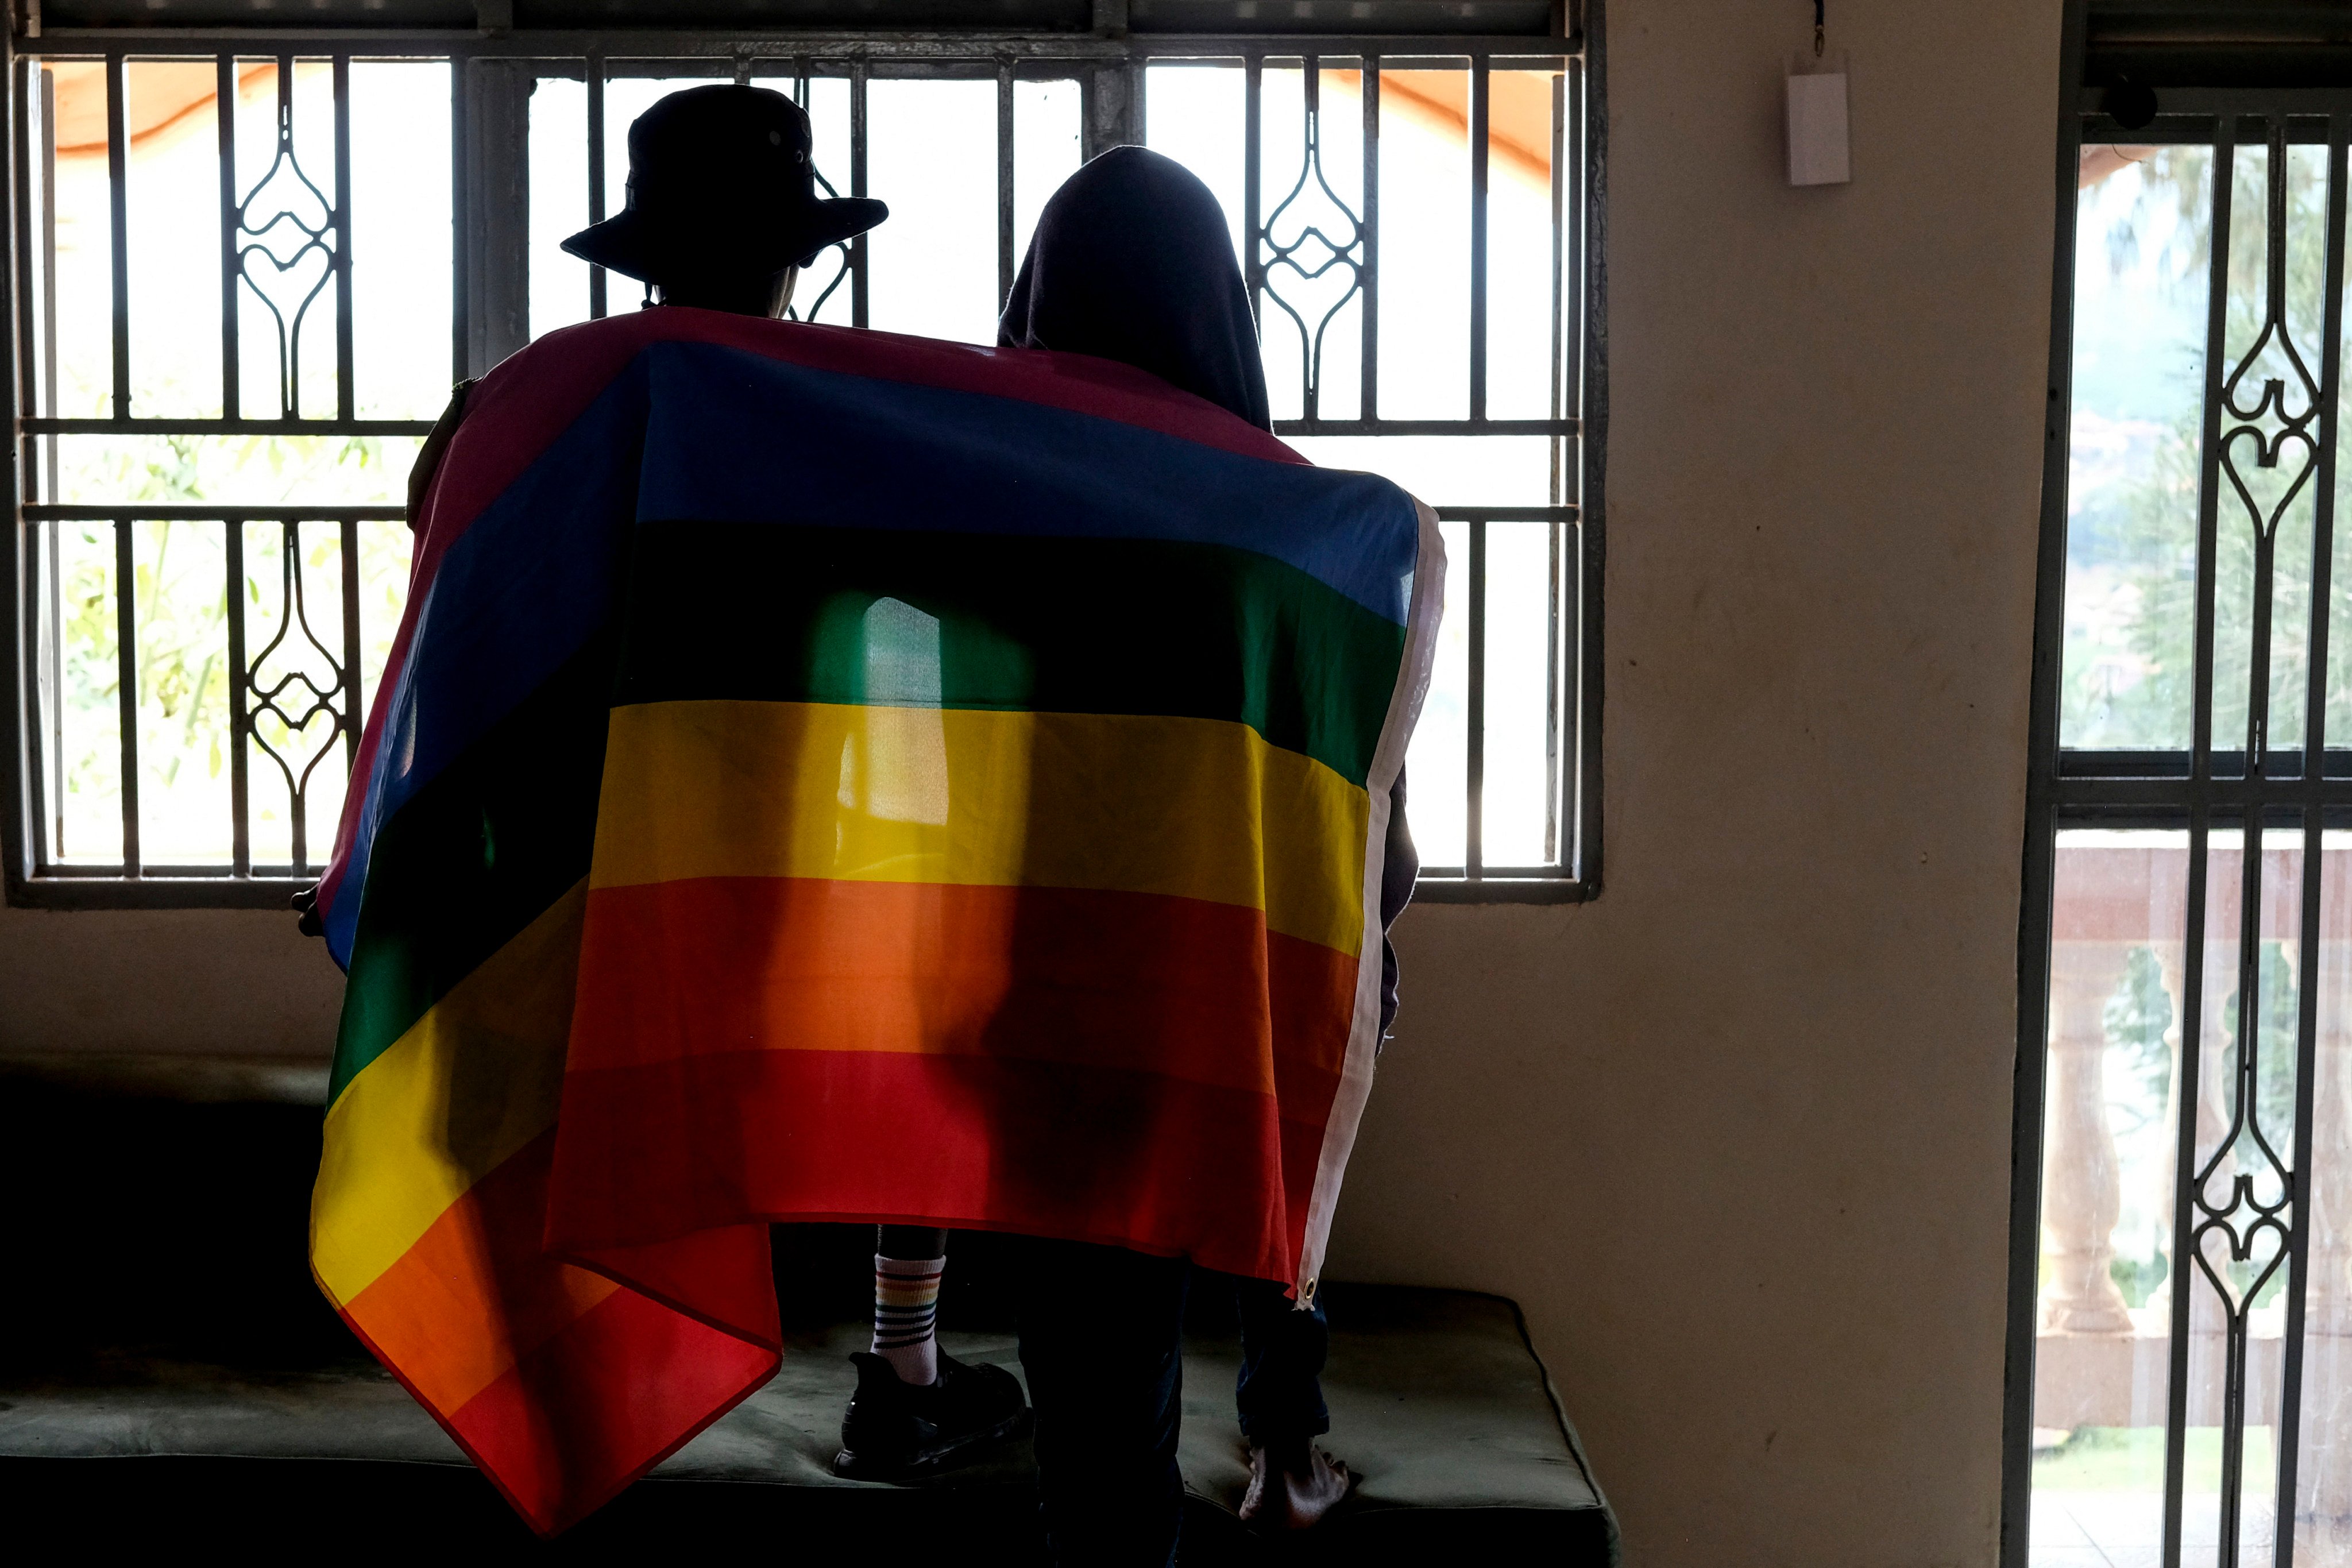 A gay Ugandan couple cover themselves with a pride flag as they pose for a photograph in Uganda in March. Photo: AP